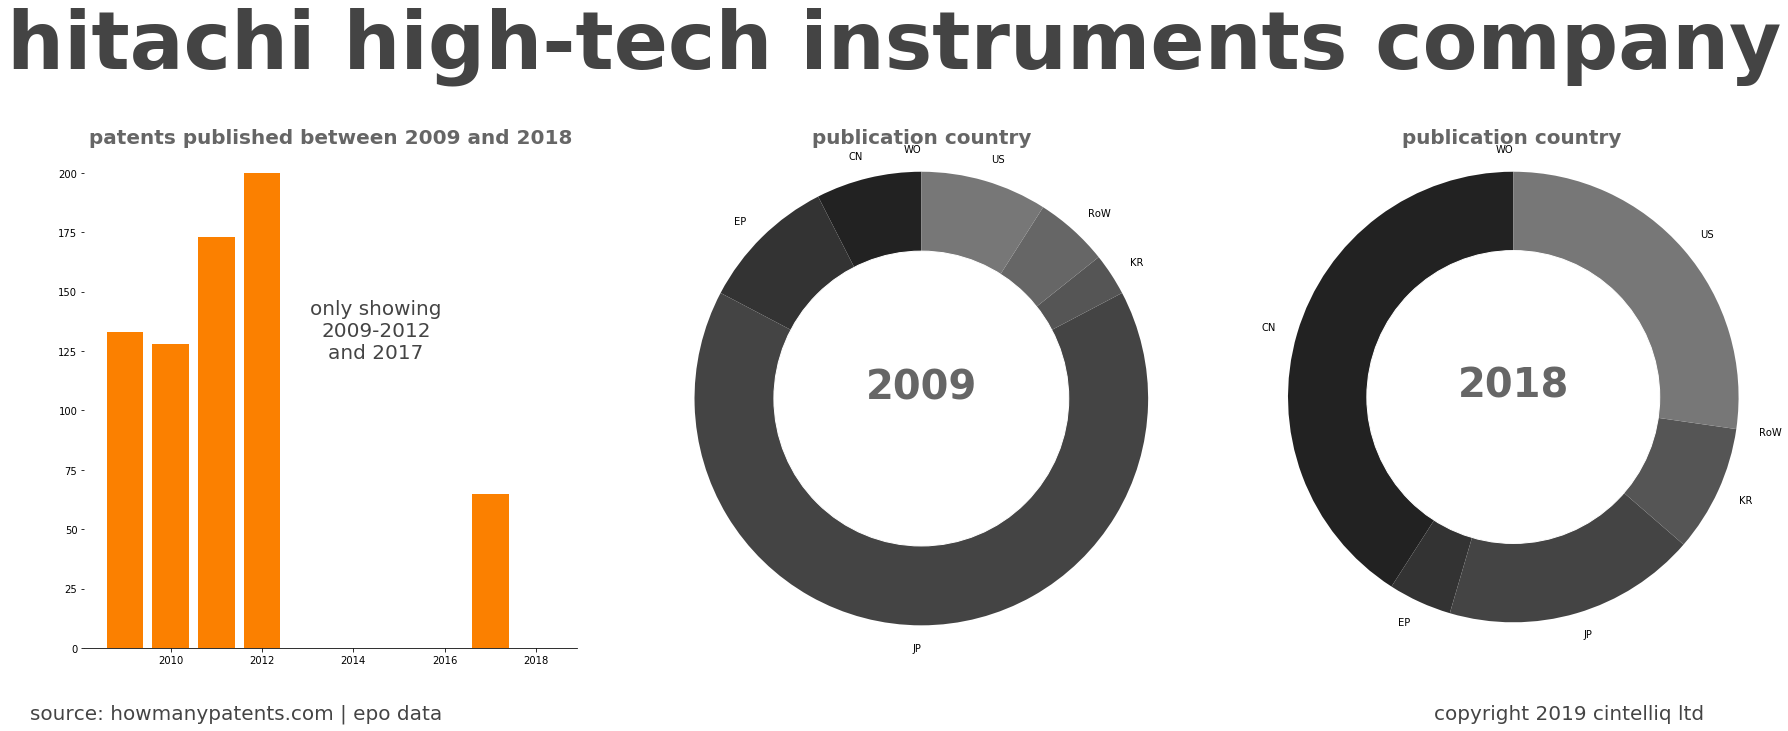 summary of patents for Hitachi High-Tech Instruments Company